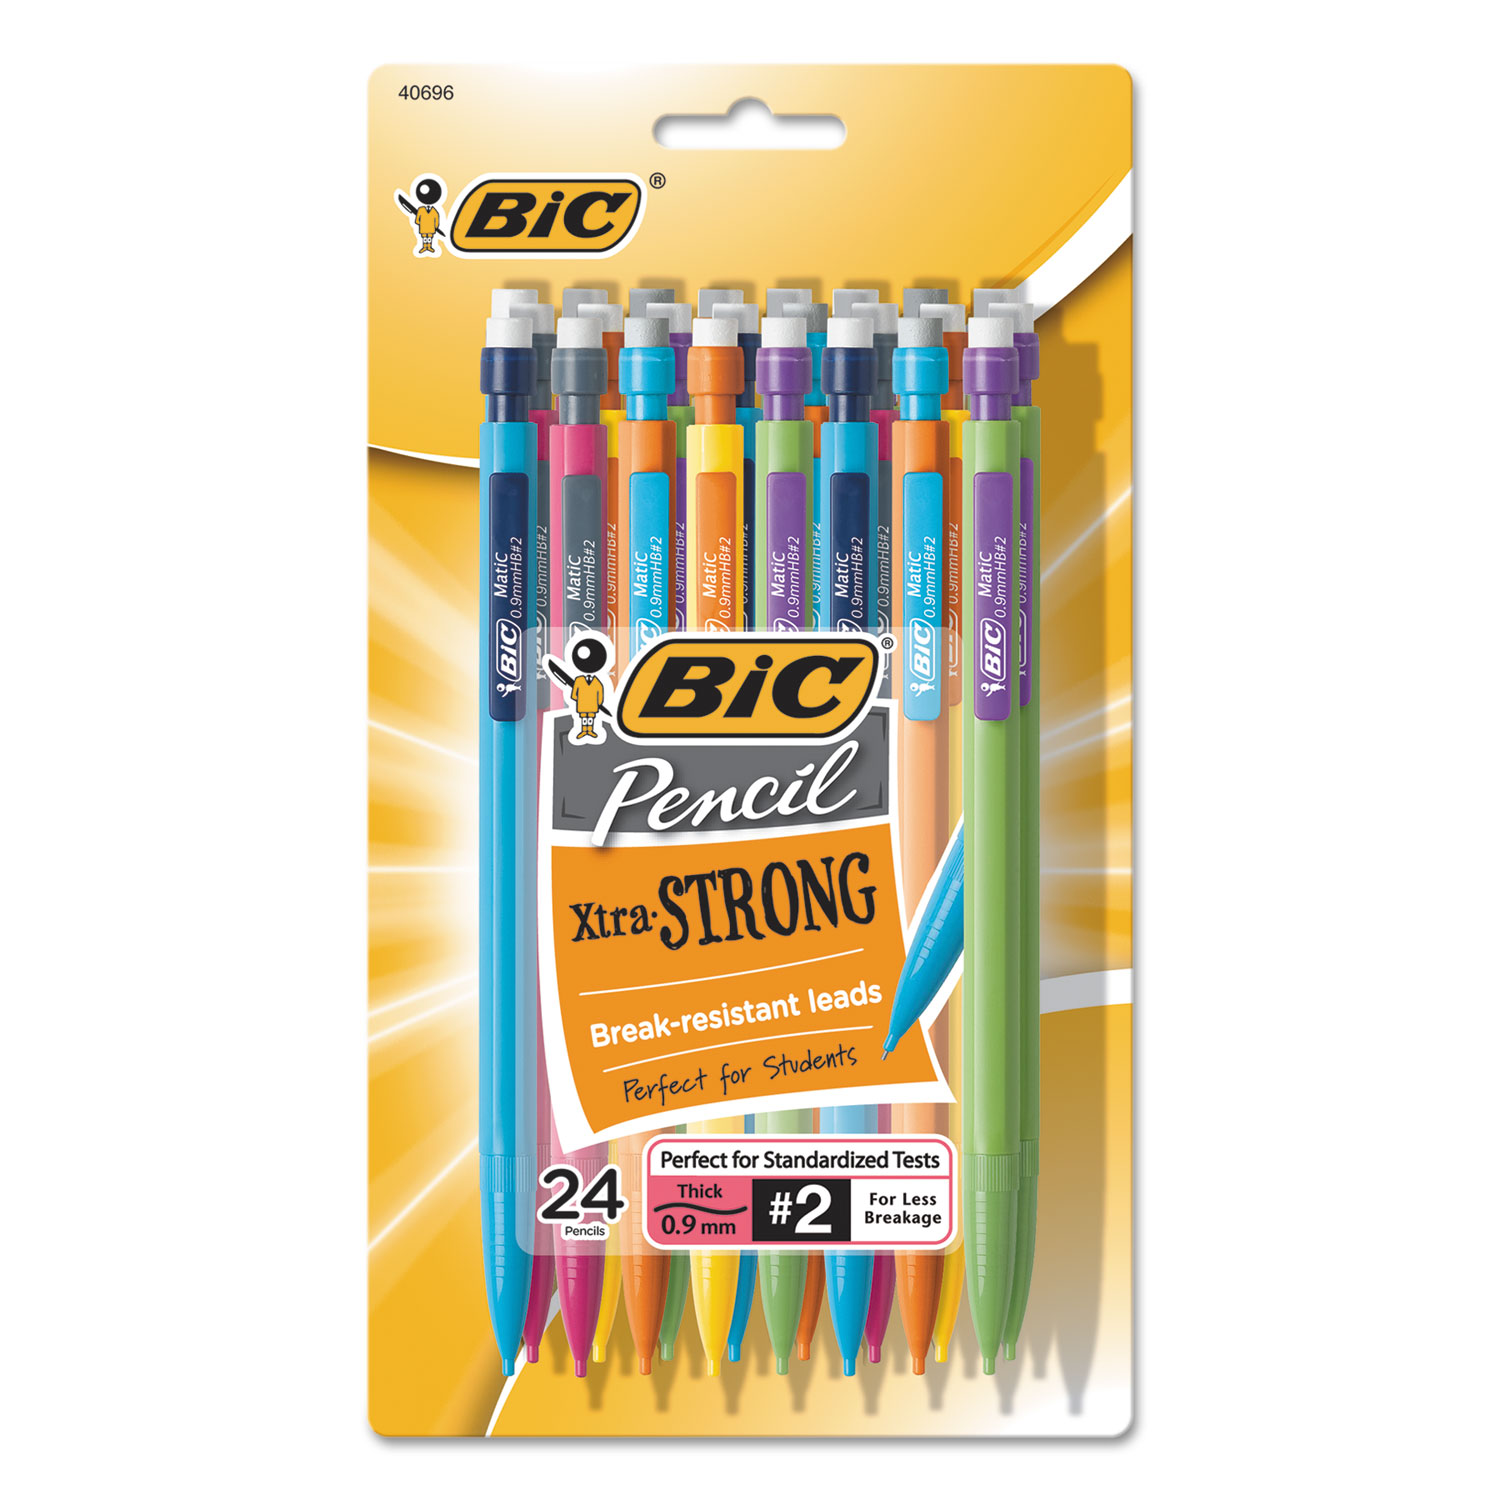 BIC Kids Activity Case - 24 Colouring Pencils/24 Felt Pens/16 Crayons/36  Colouring Stickers BIC